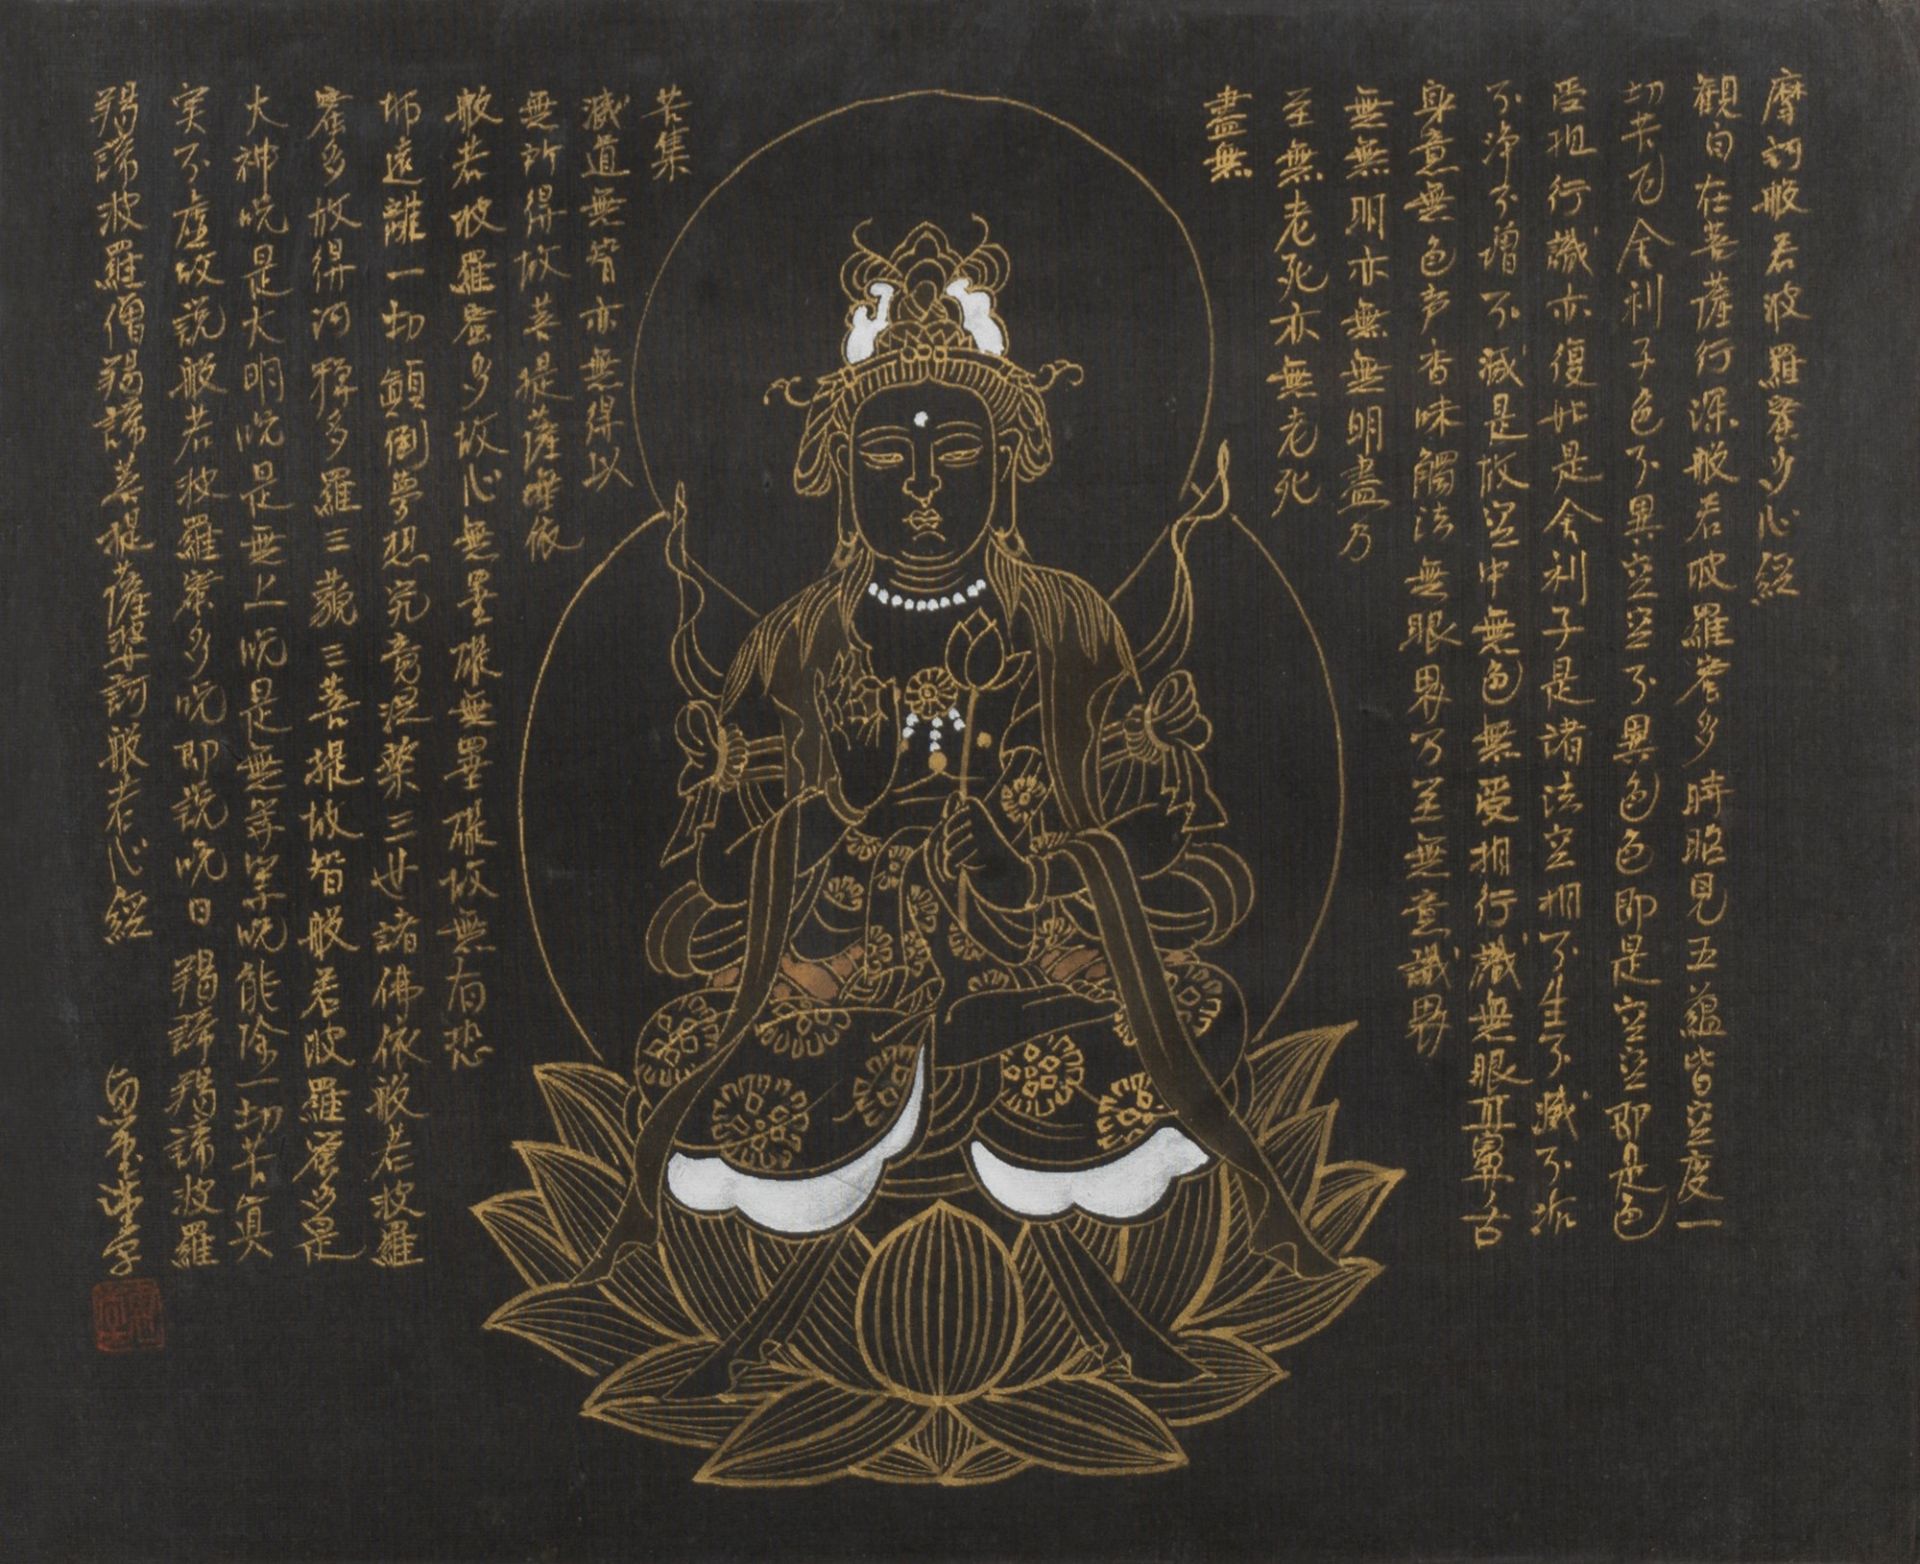 Silk painting representing Buddha seated on a lotus flower, China, 20th century - Image 2 of 2